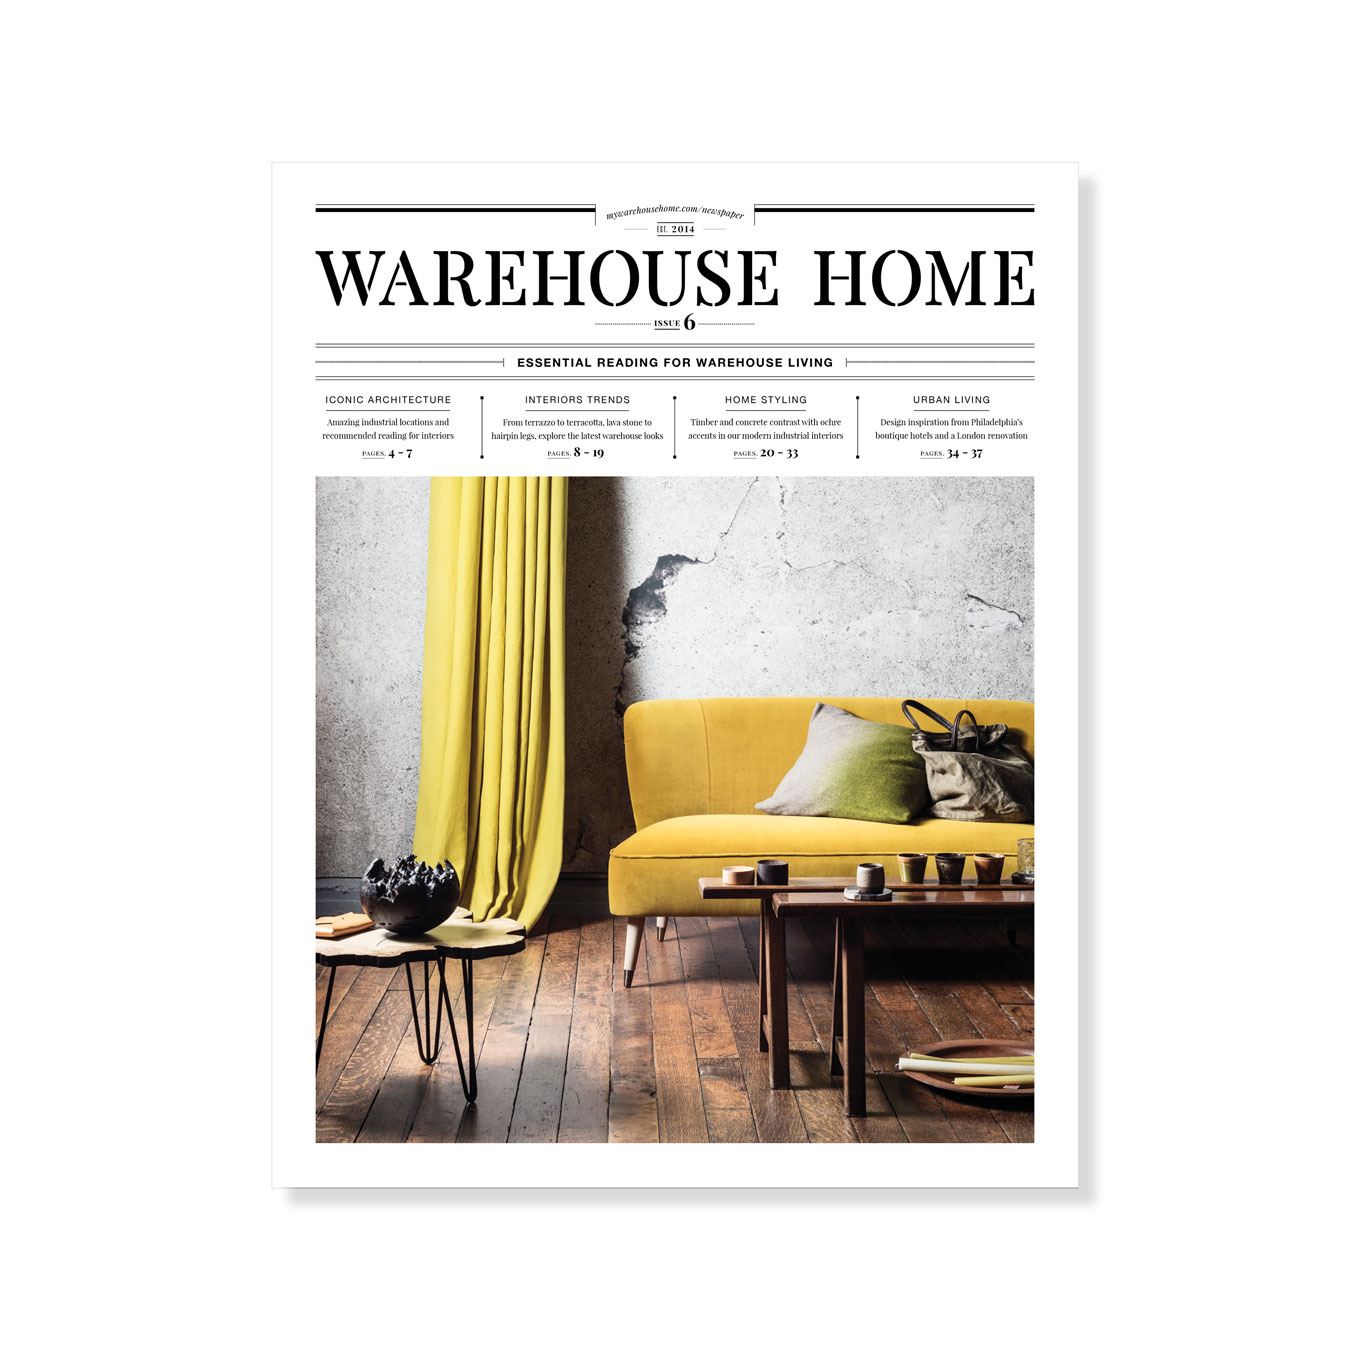 WAREHOUSE HOME Issue 6 - June 2017